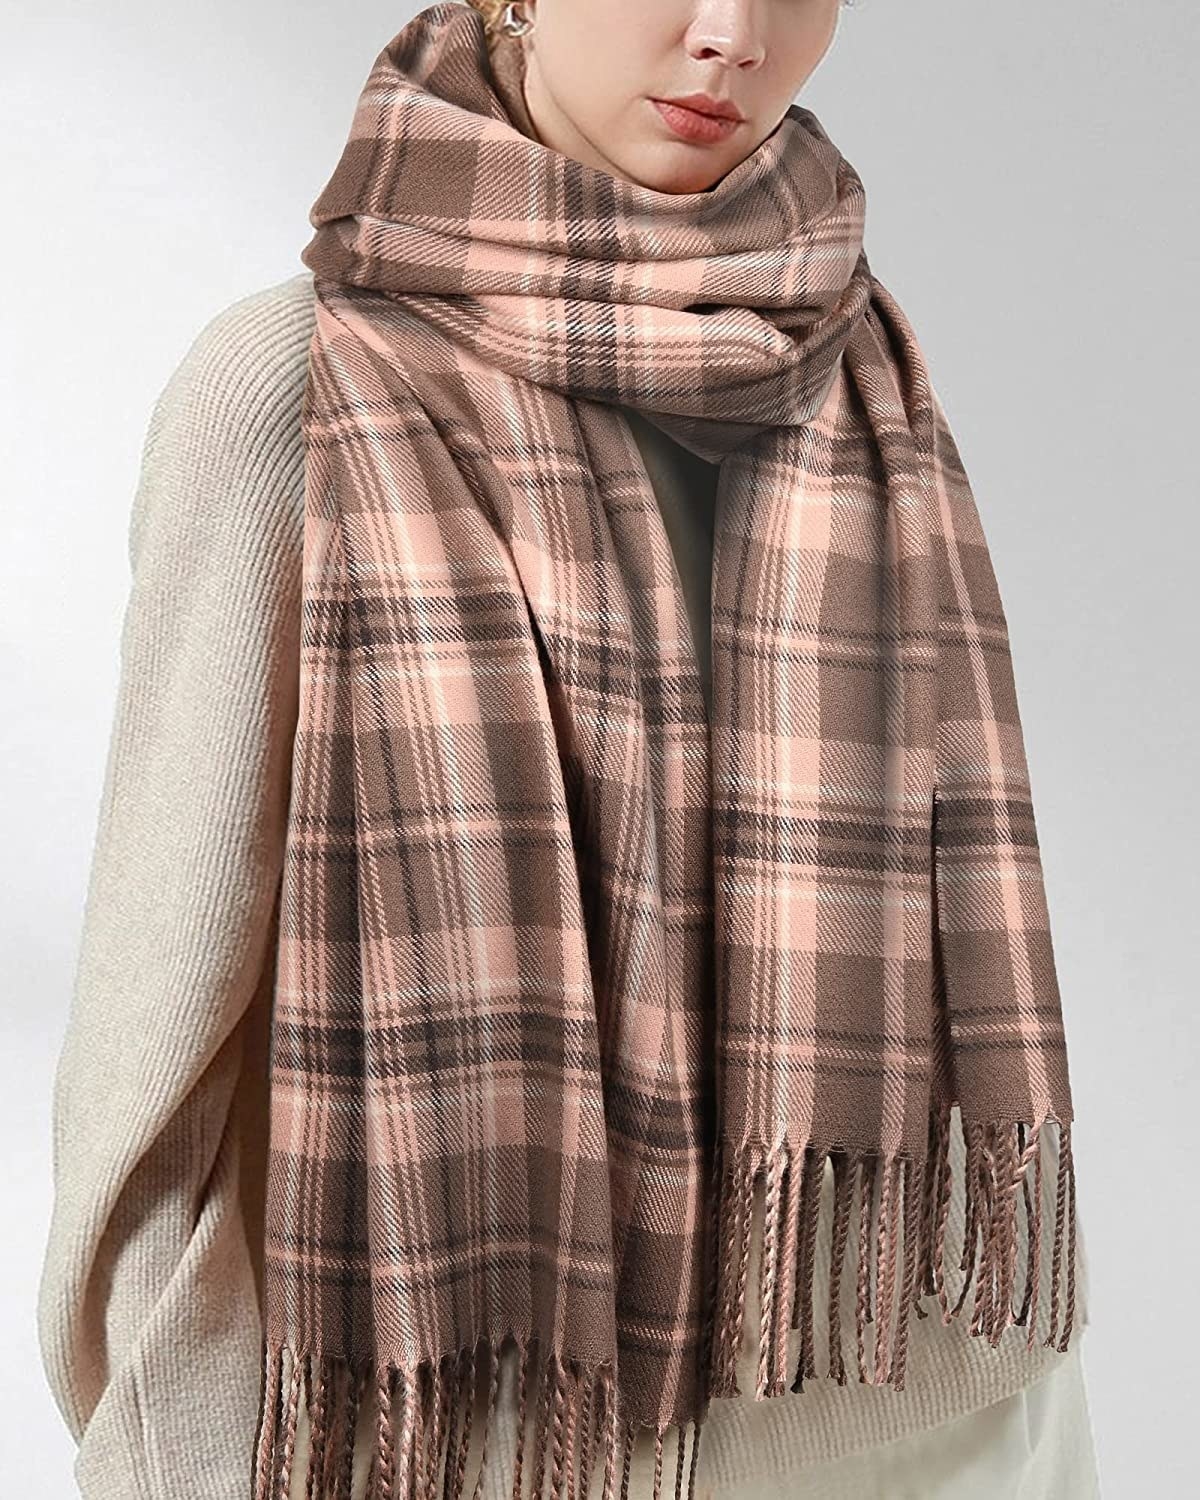 Model in the brown plaid scarf with fringe